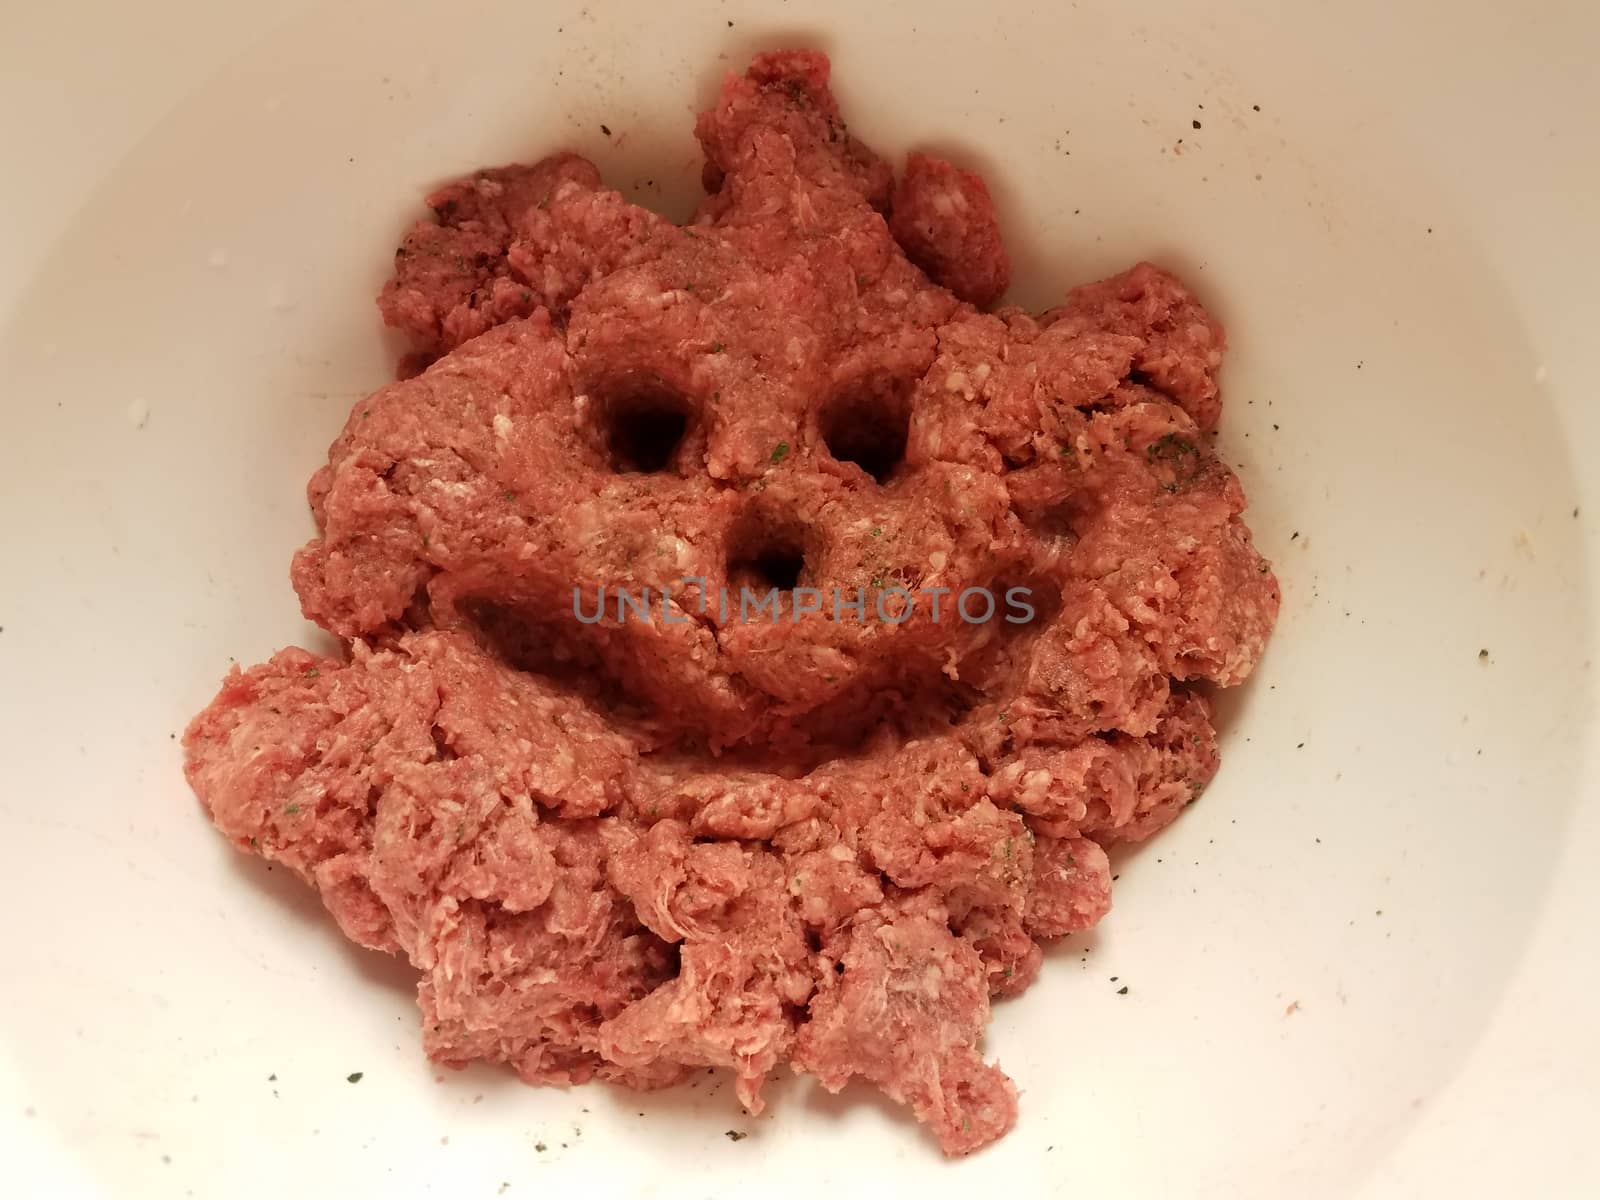 meat face in raw beef in white container by stockphotofan1